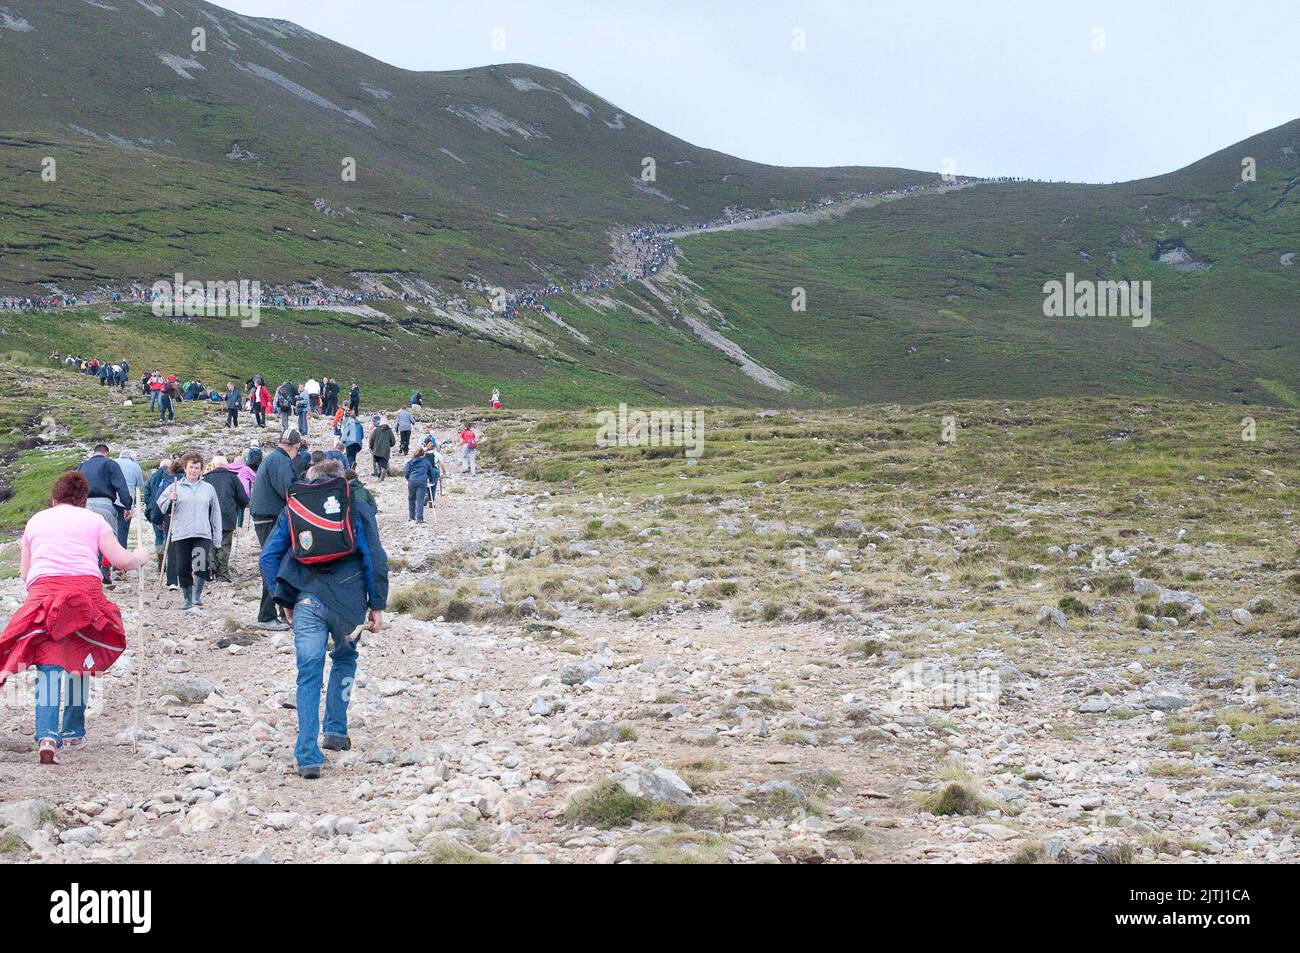 'Reek Sunday', a guelling pilgrimage up Croagh Patrick, County Mayo on the last Sunday in July each year, to visit the location where Saint Patrick stayed for 40 days, and from where his was said to have banished the lizards and snakes from Ireland. Stock Photo